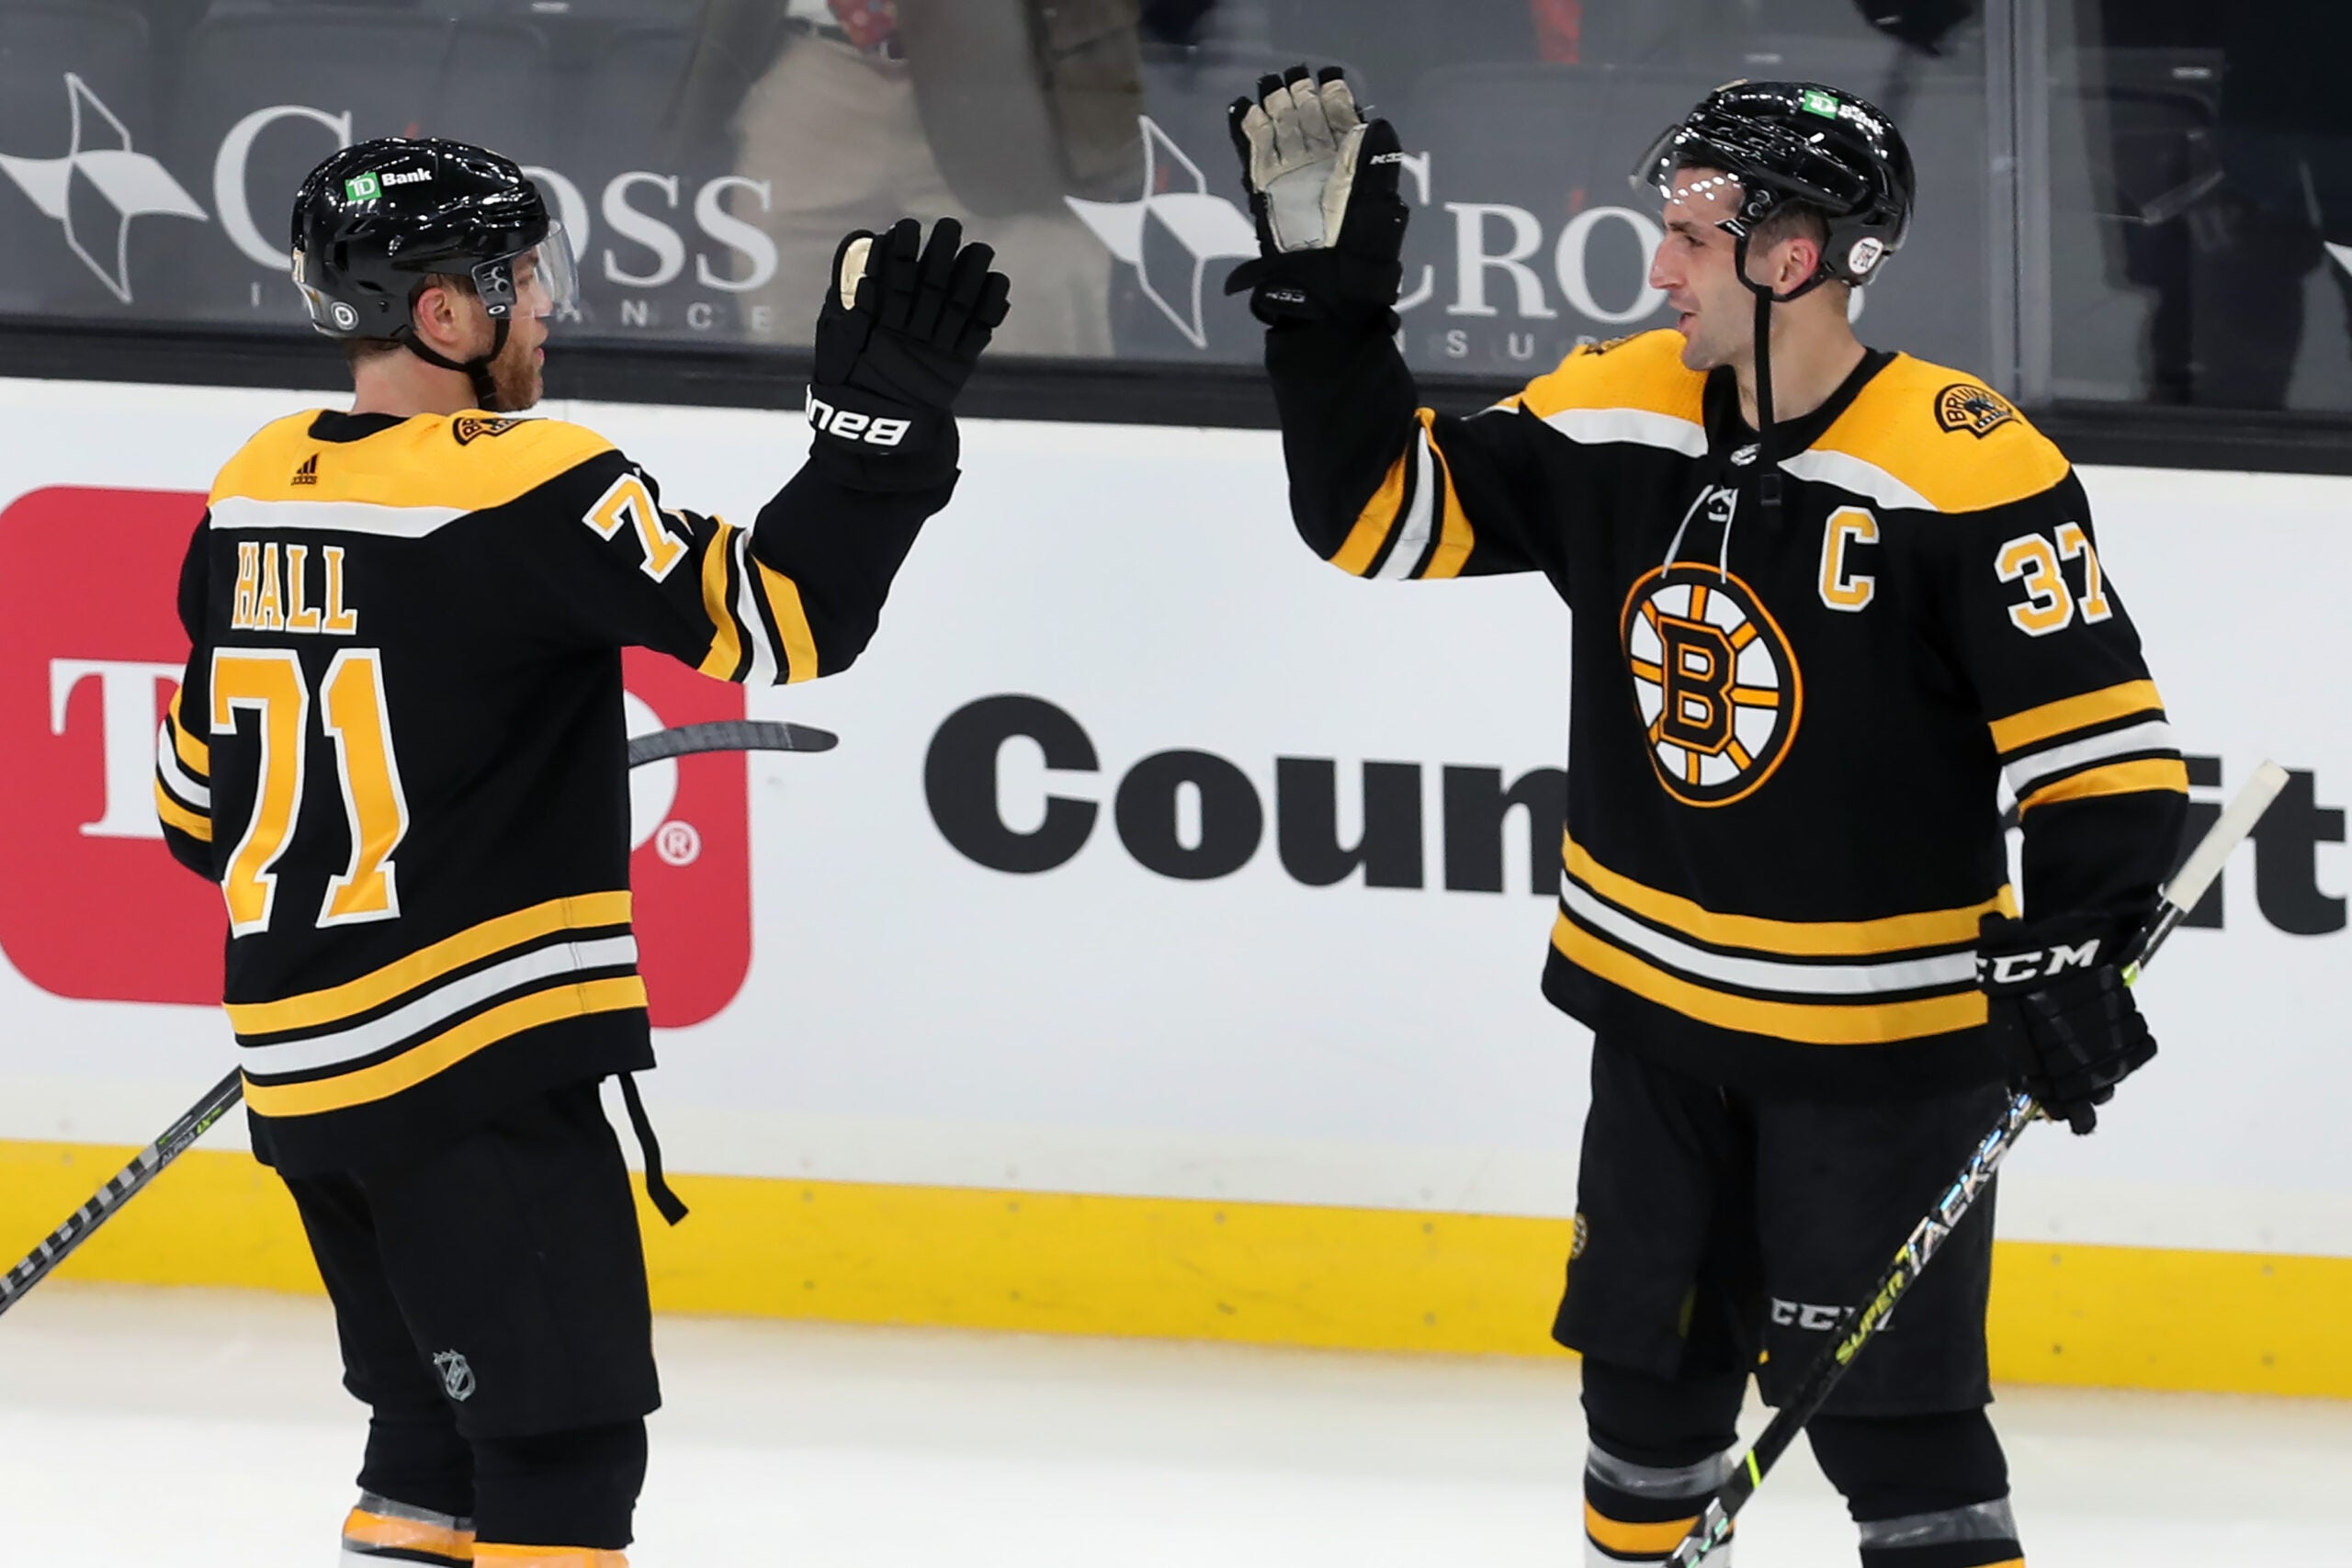 In Taylor Hall's debut, Bruins beat Sabres 32 in shootout